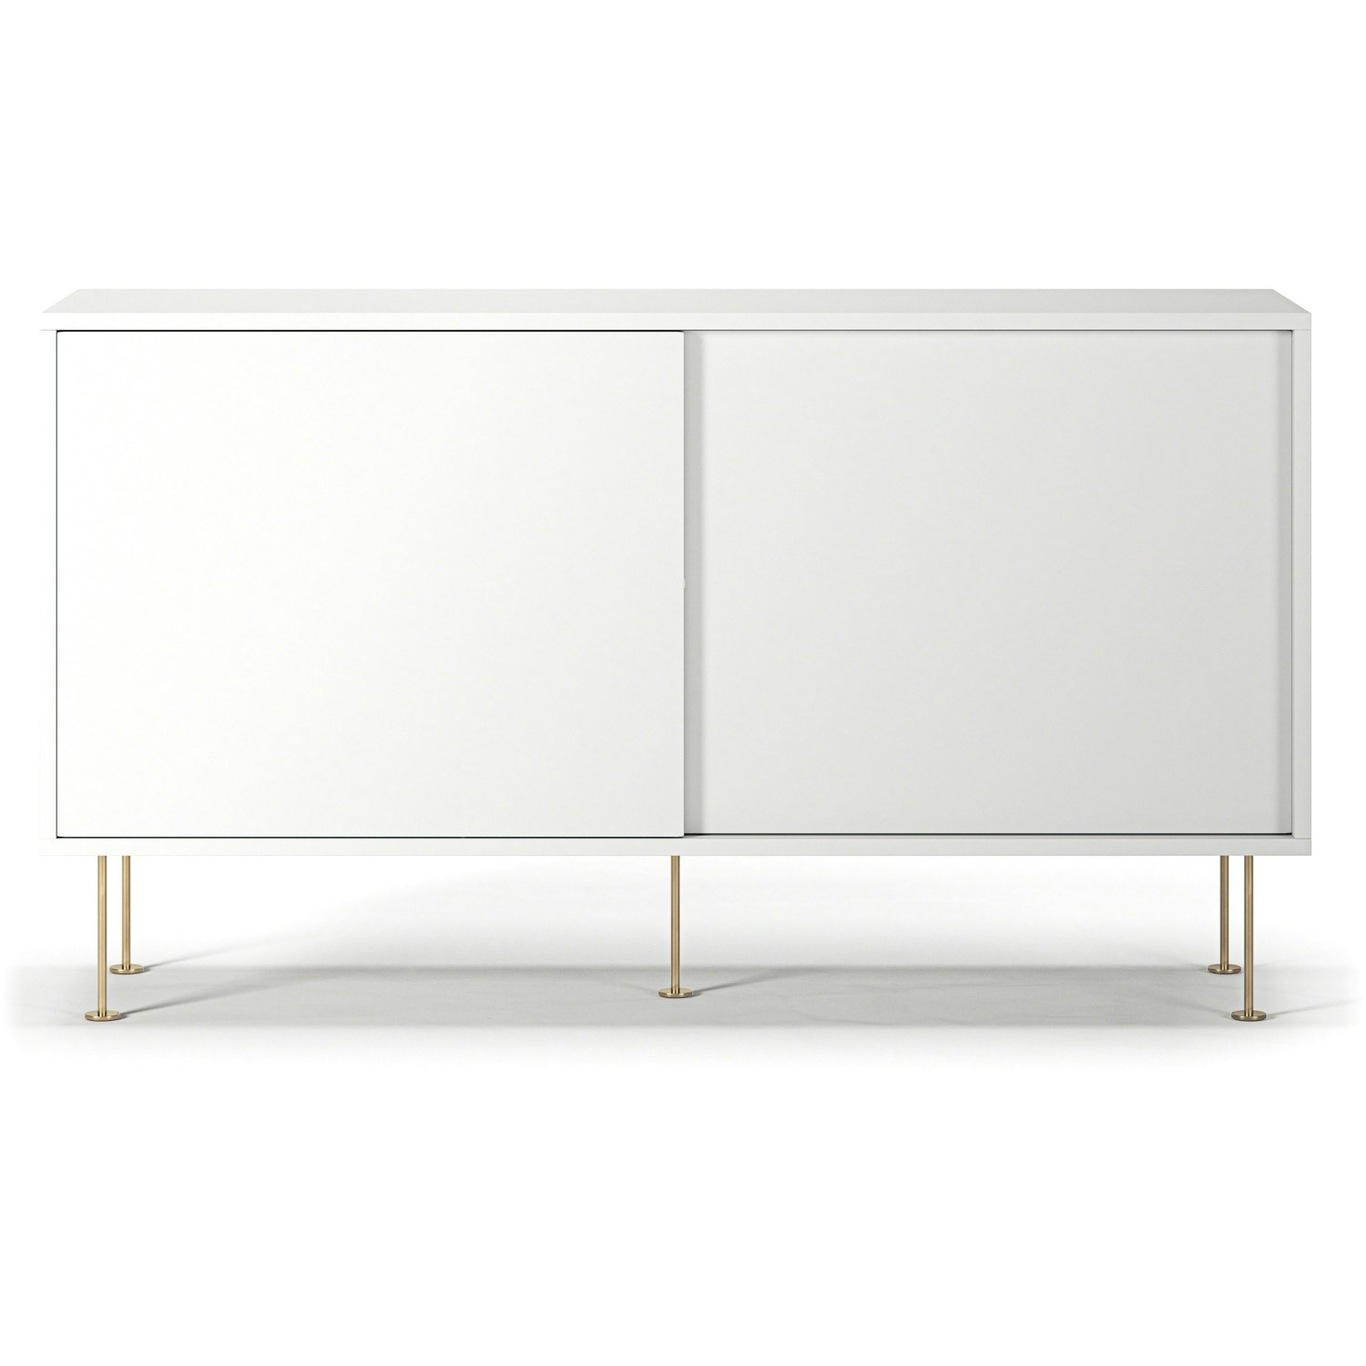 Vogue Side Table With Legs 136 cm, White / Brass